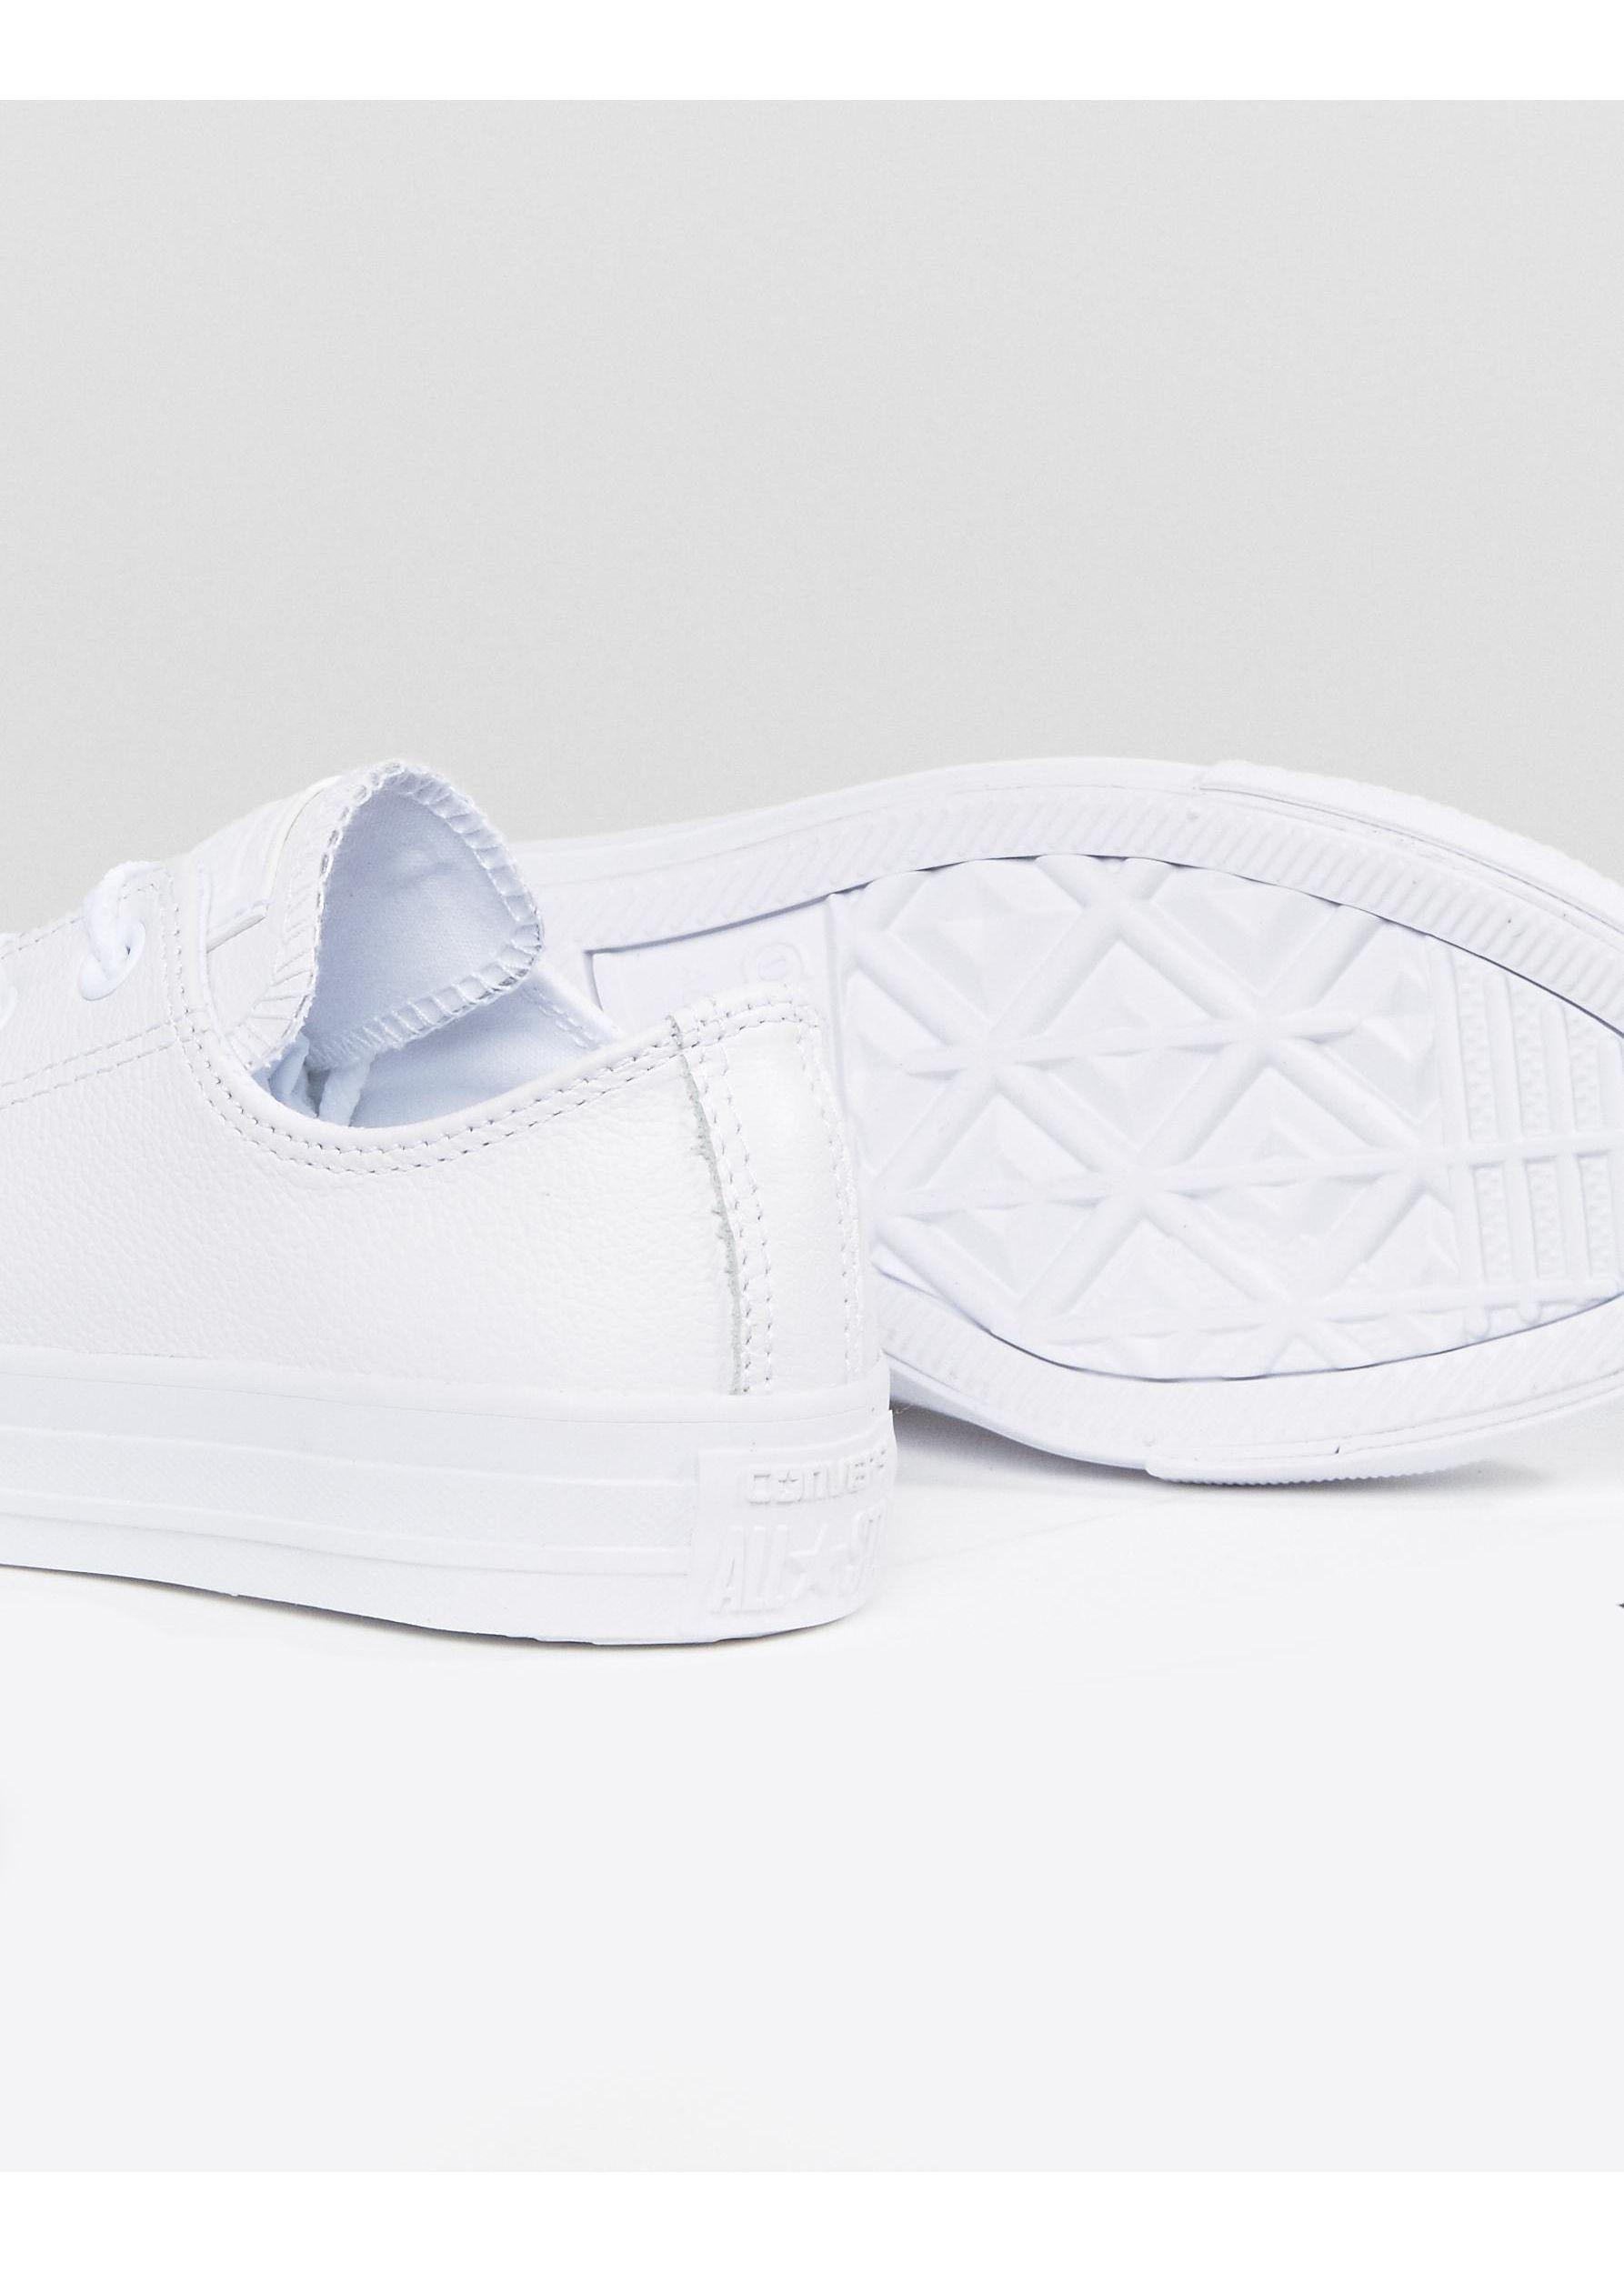 Converse Chuck Taylor Ox Leather Monochrome Sneakers in White | Lyst